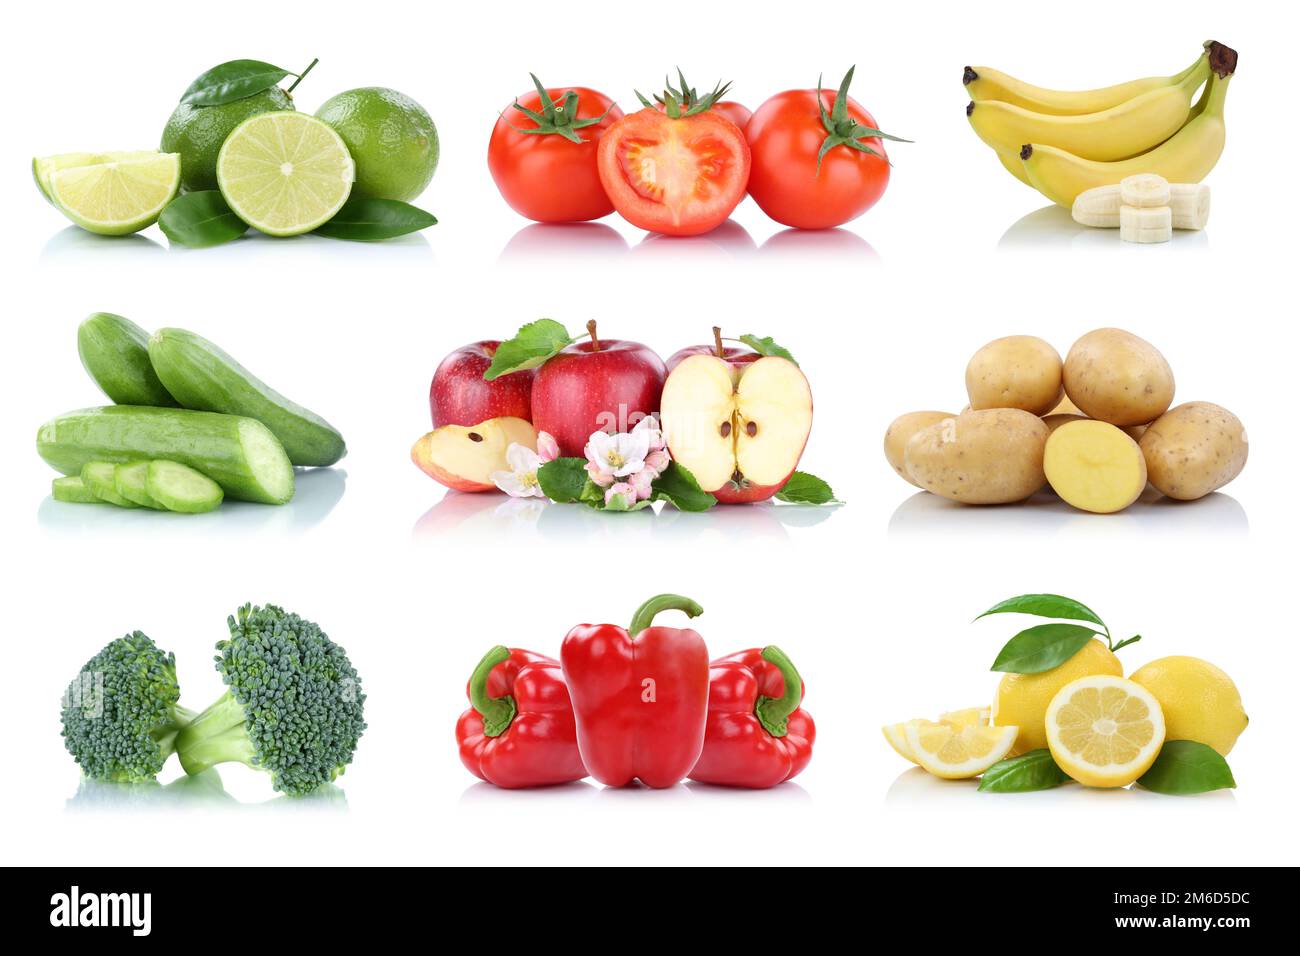 Fruits vegetables collection isolated apple apples tomatoes banana bell pepper colors fresh fruit Stock Photo